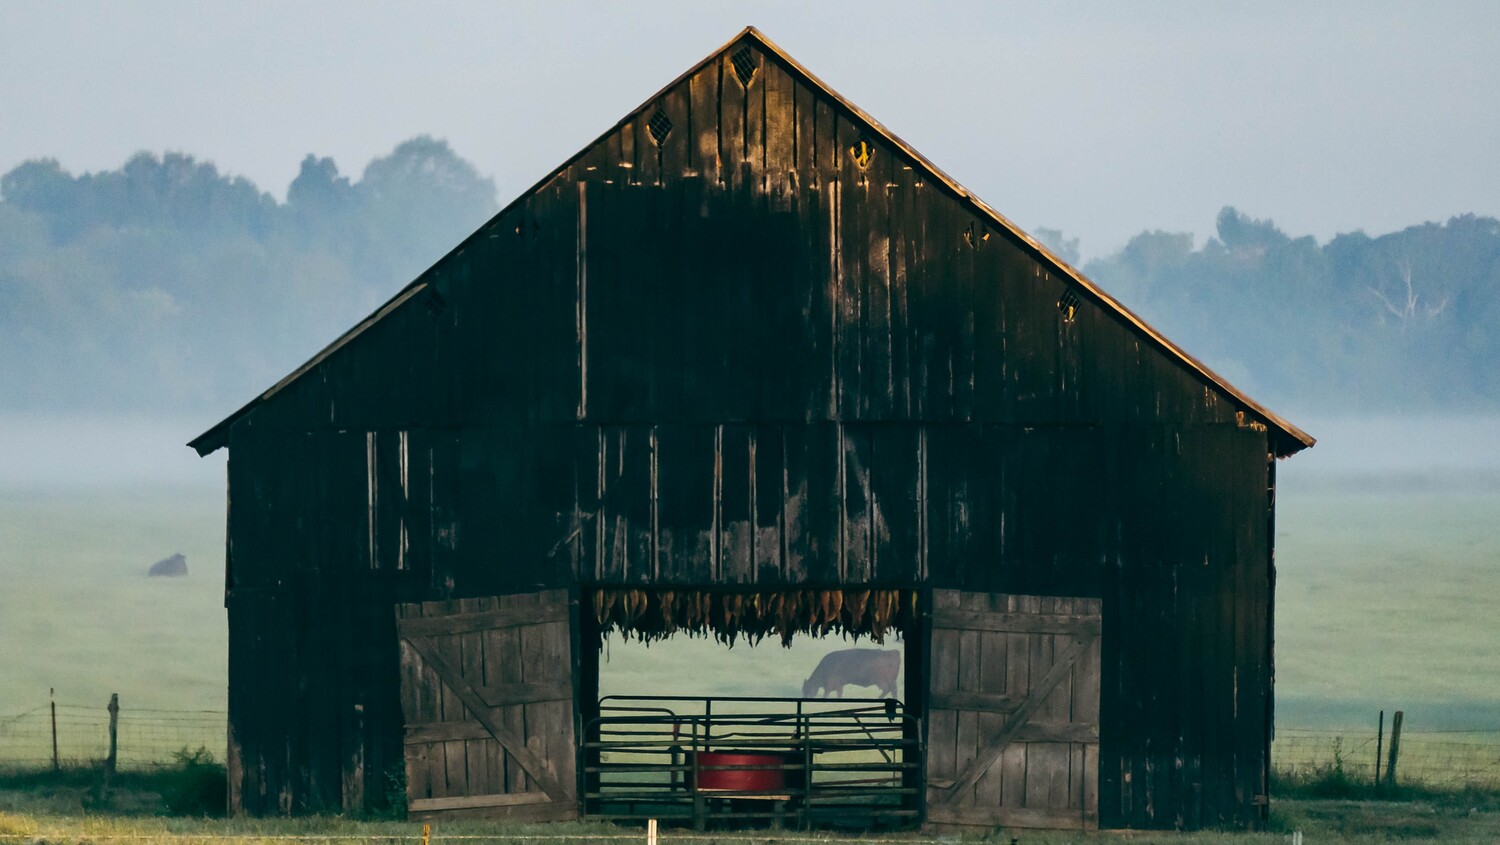 The Tobacco Barns, Cathedrals, and Churches That Make Us